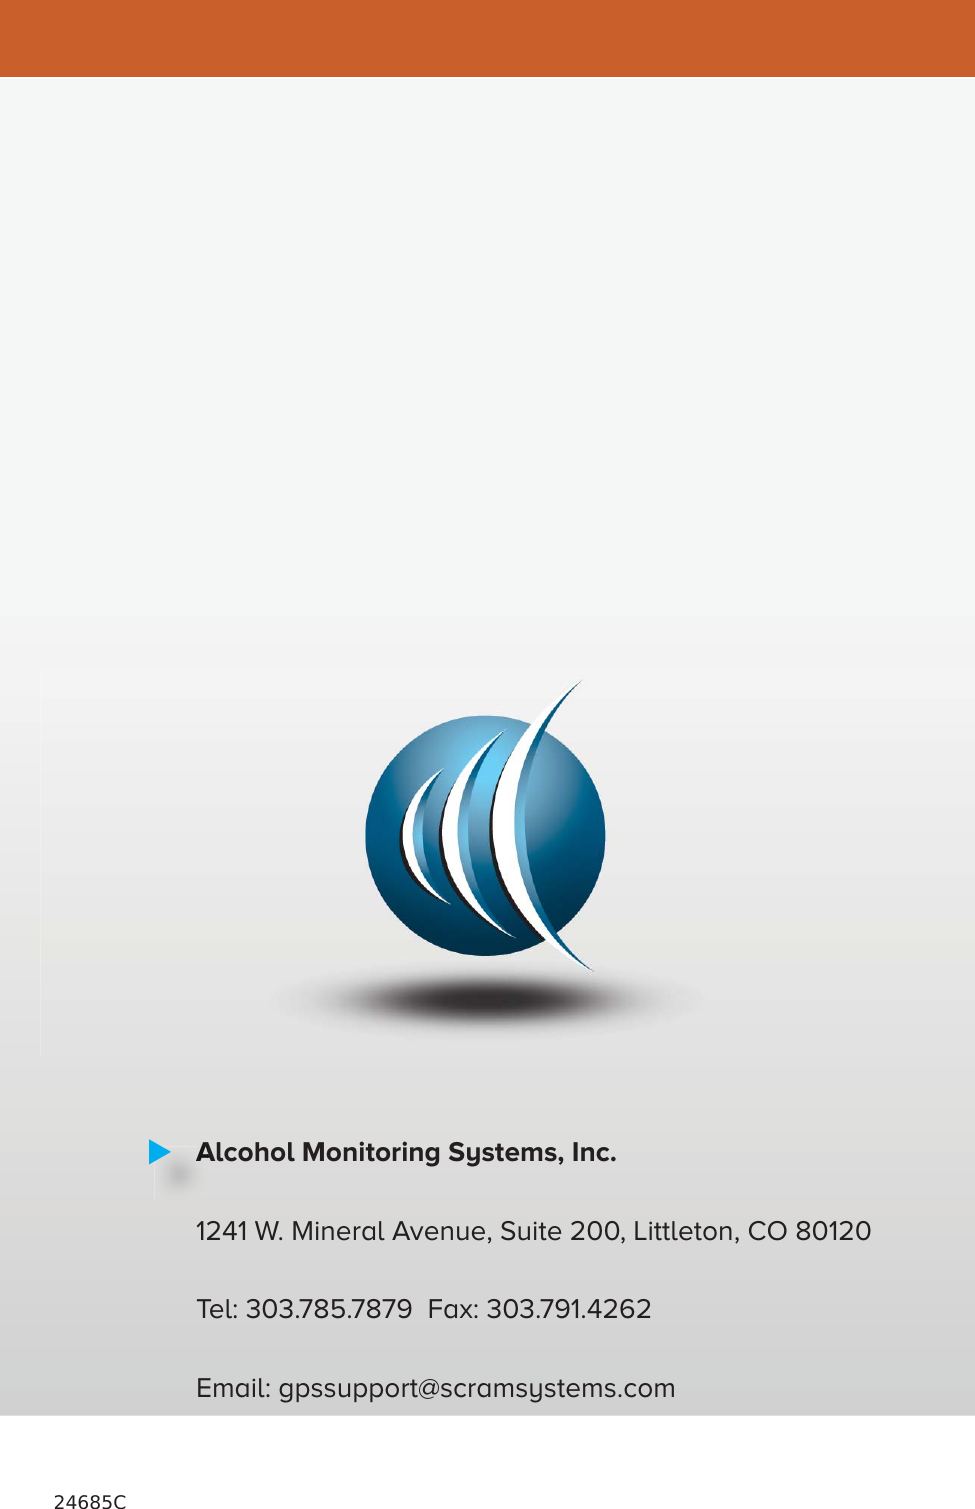 24685CAlcohol Monitoring Systems, Inc.1241 W. Mineral Avenue, Suite 200, Littleton, CO 80120Tel: 303.785.7879  Fax: 303.791.4262Email: gpssupport@scramsystems.comA